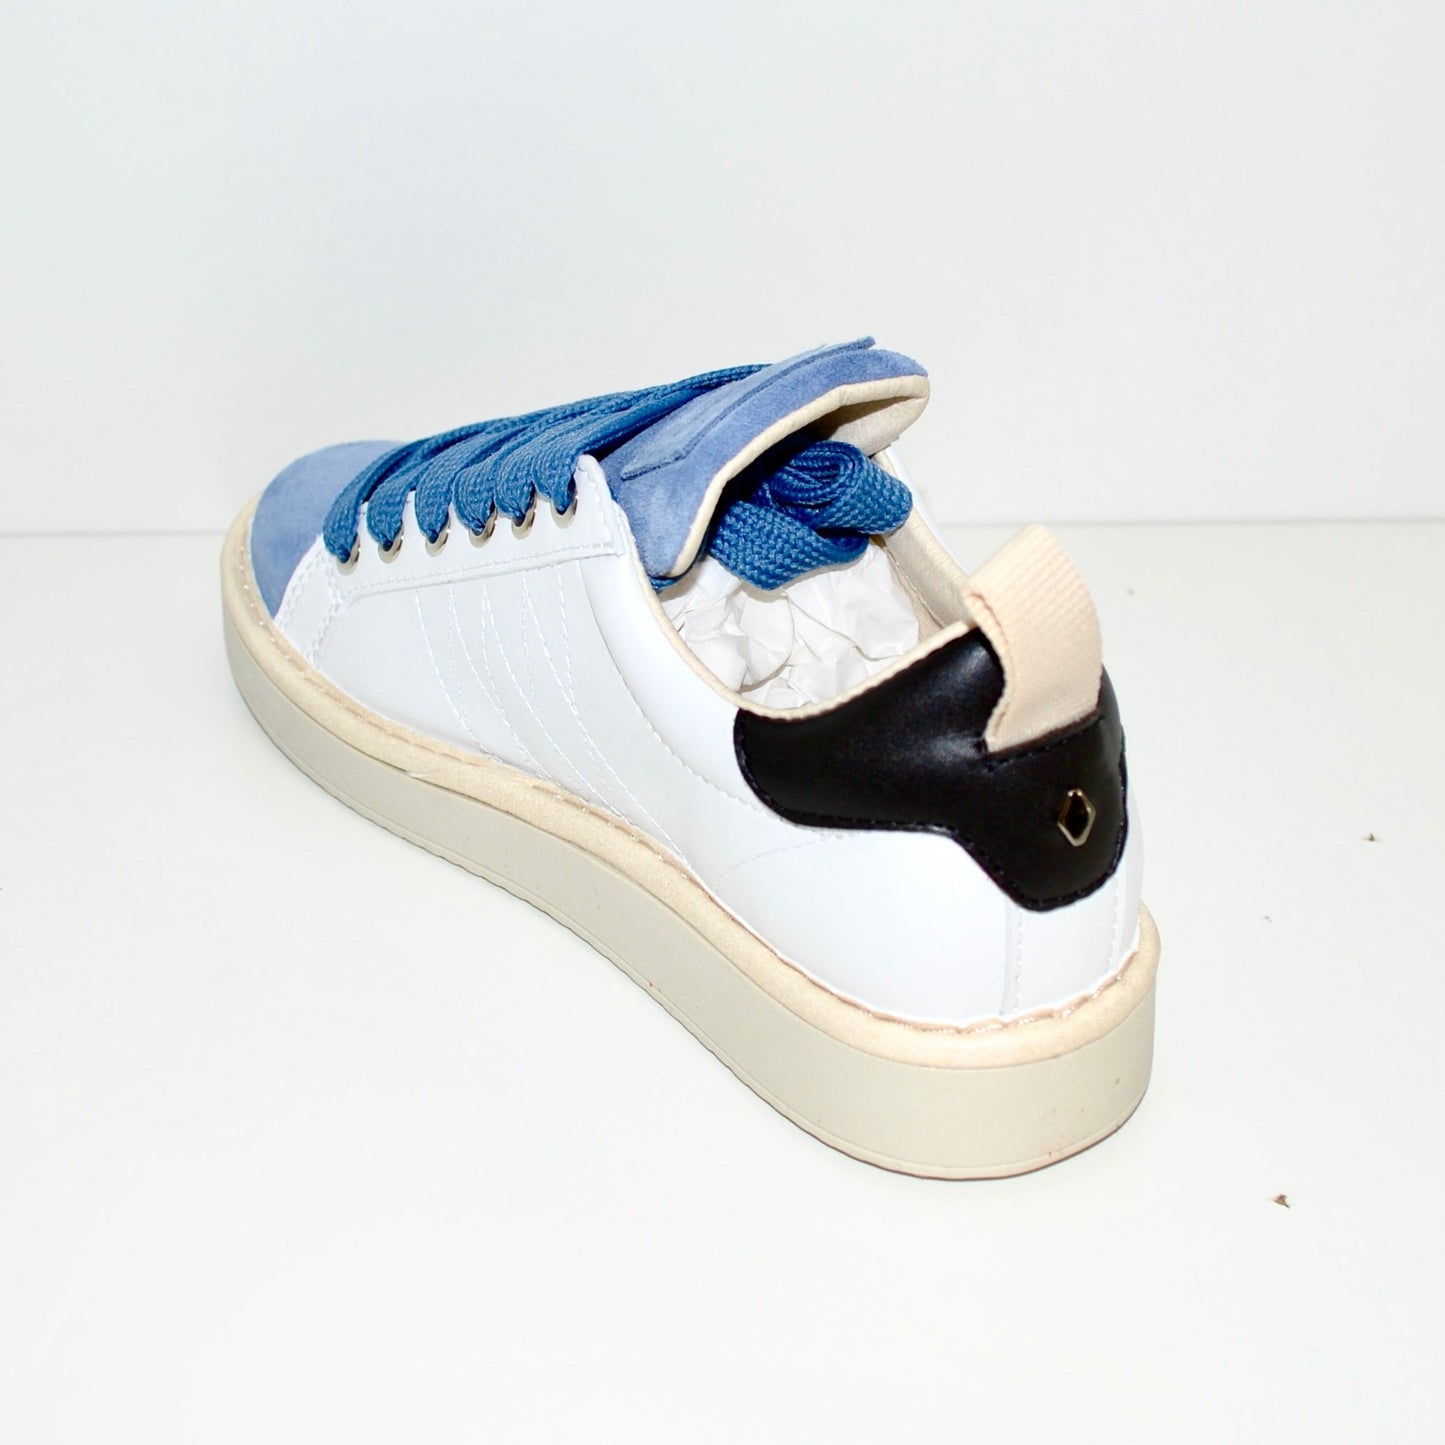 Sneakers Panchic woman white leather and blue suede